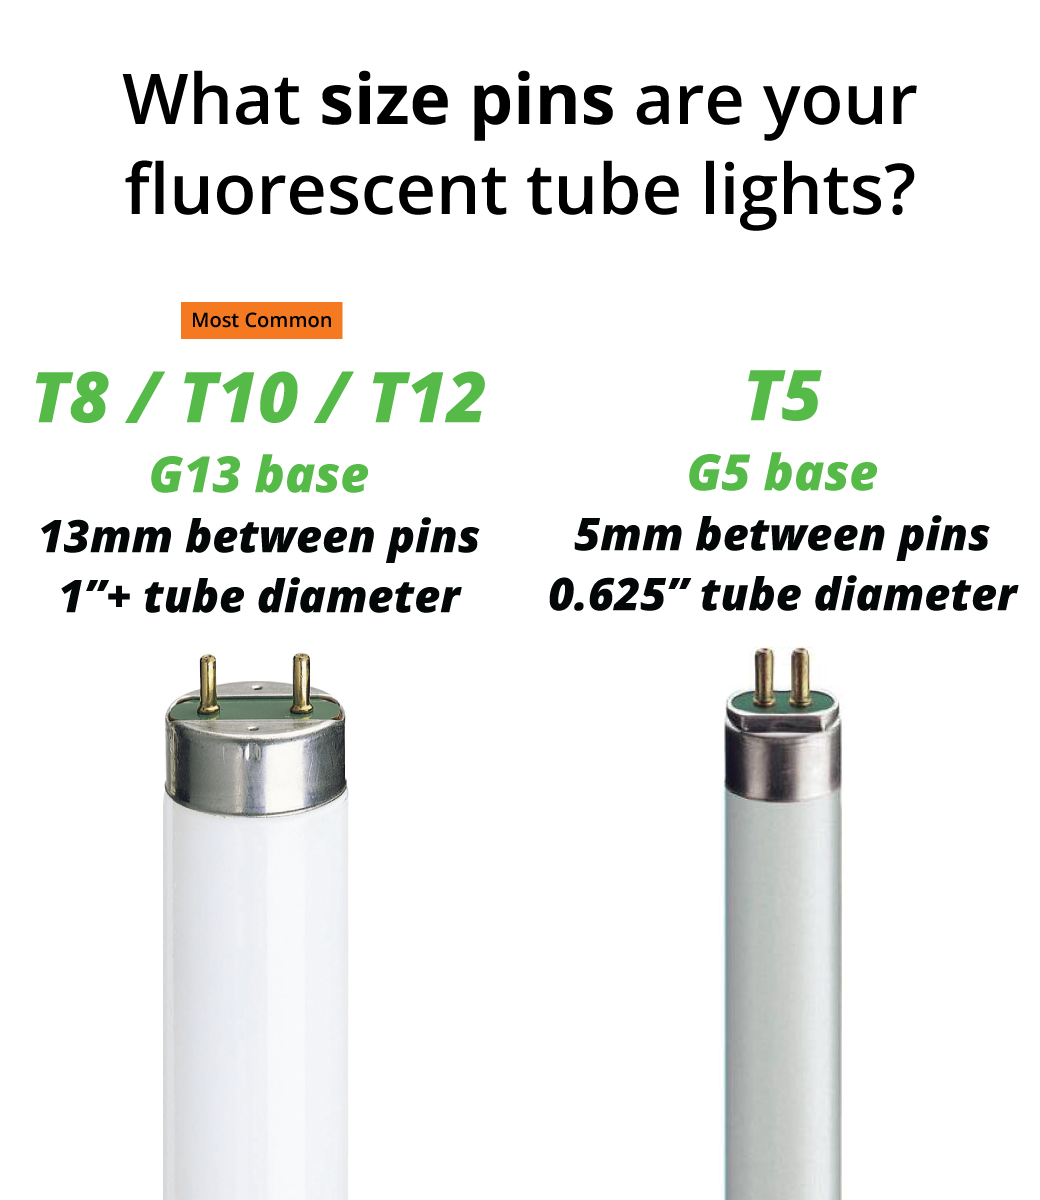 To determine your LED tube light pin size, measure the diameter of the fluorescent tube, or remove the tube from the fixture and measure the distance between the pins.